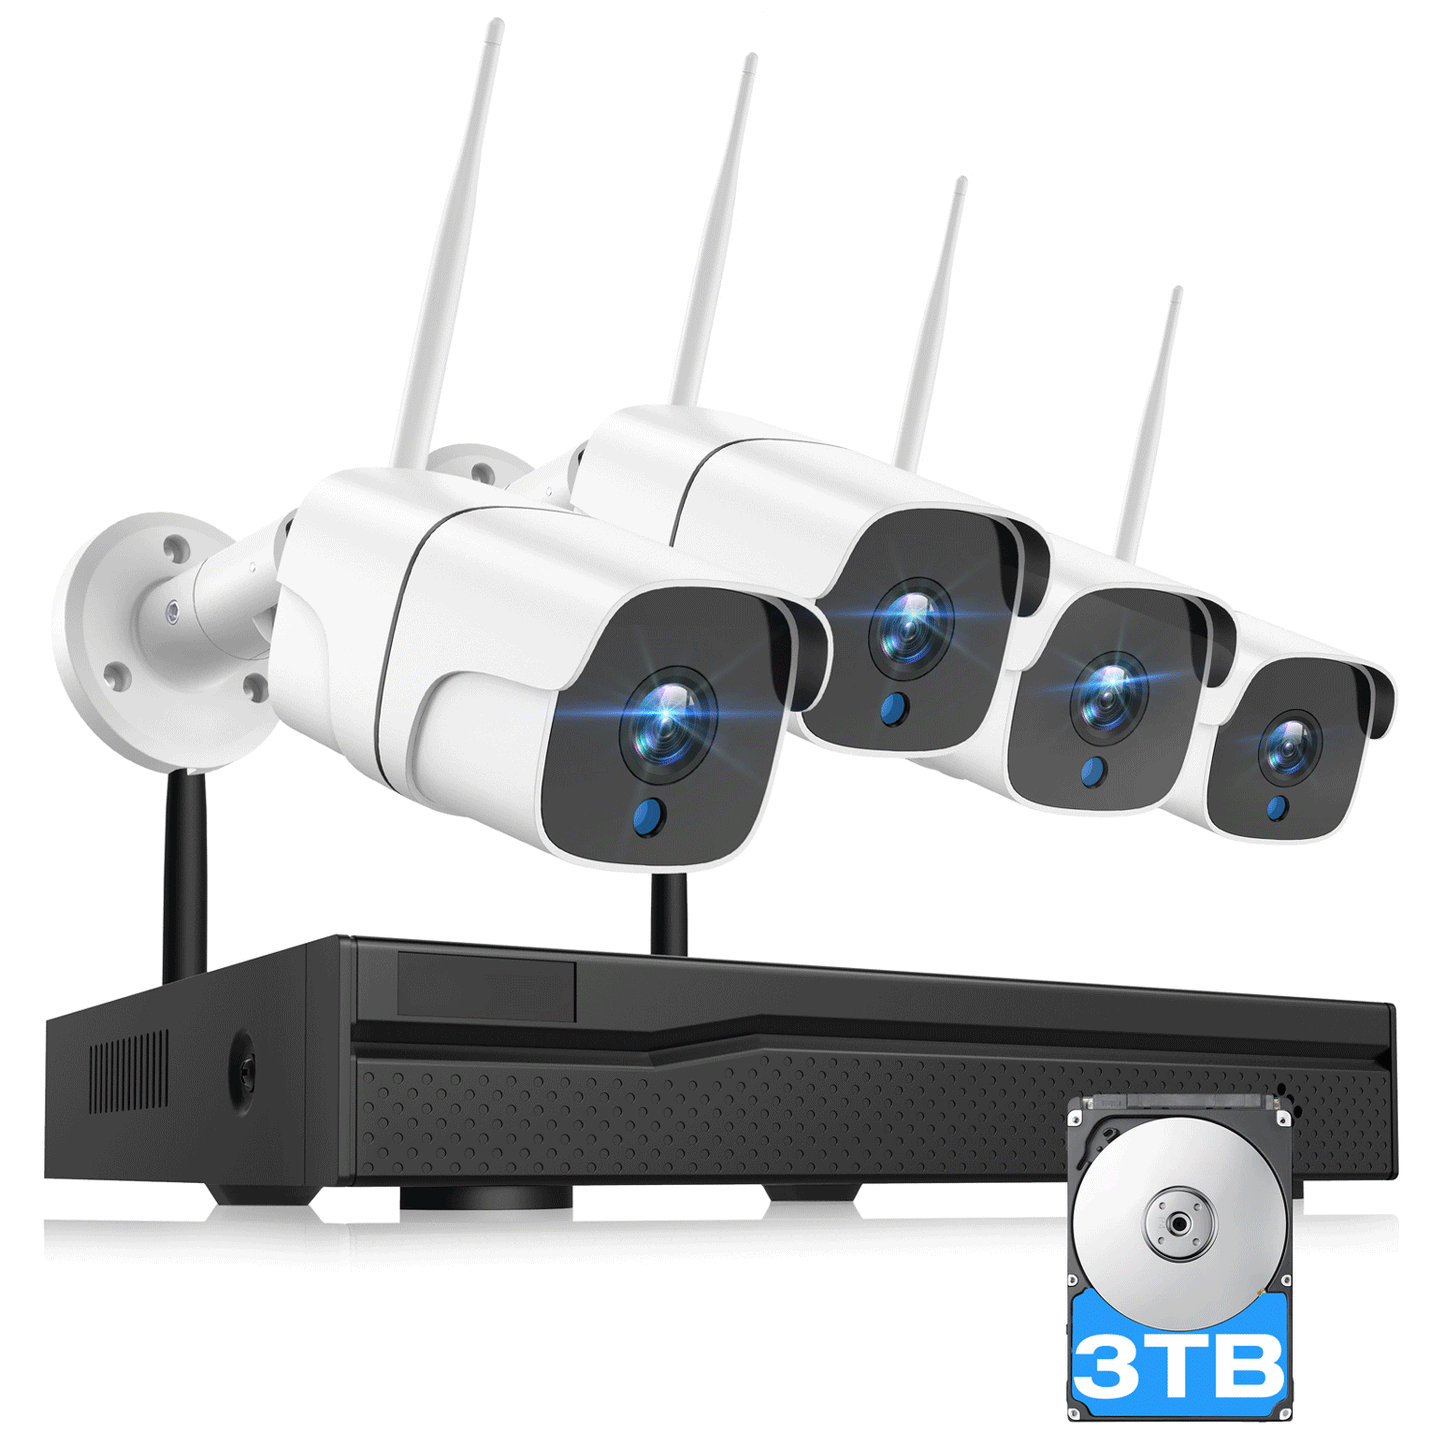 TOGUARD Wireless Security Camera System, 3TB Hard Drive Pre-Installed HD 1080P Security Camer Outdoor for Home Security, IP Bullet Camera 8CH NVR System with 4pcs Cameras, IP66 Waterproof